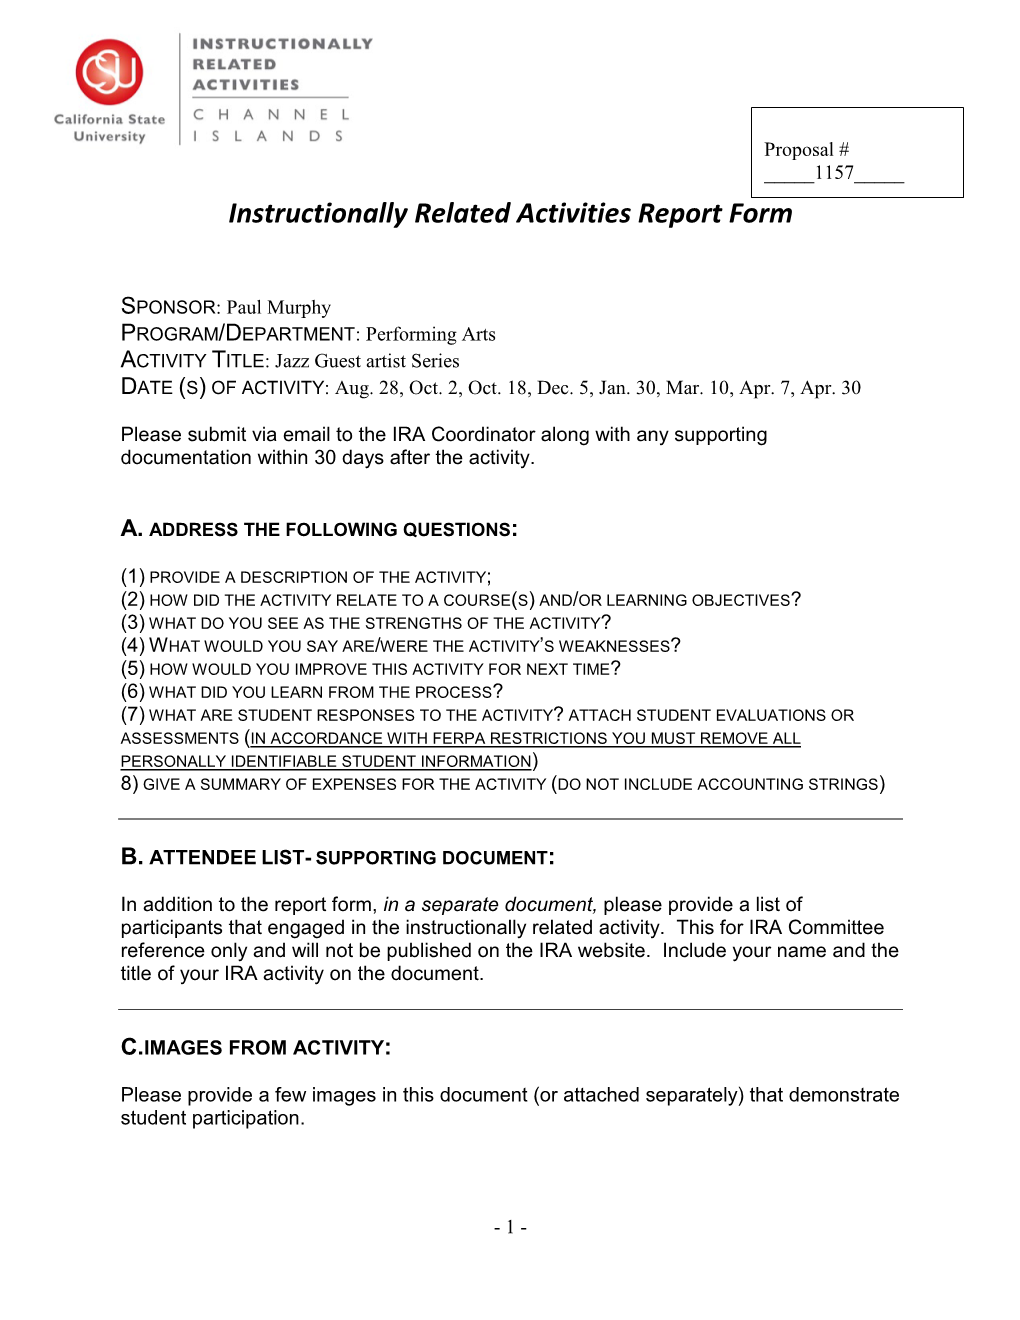 Instructionally Related Activities Report Form